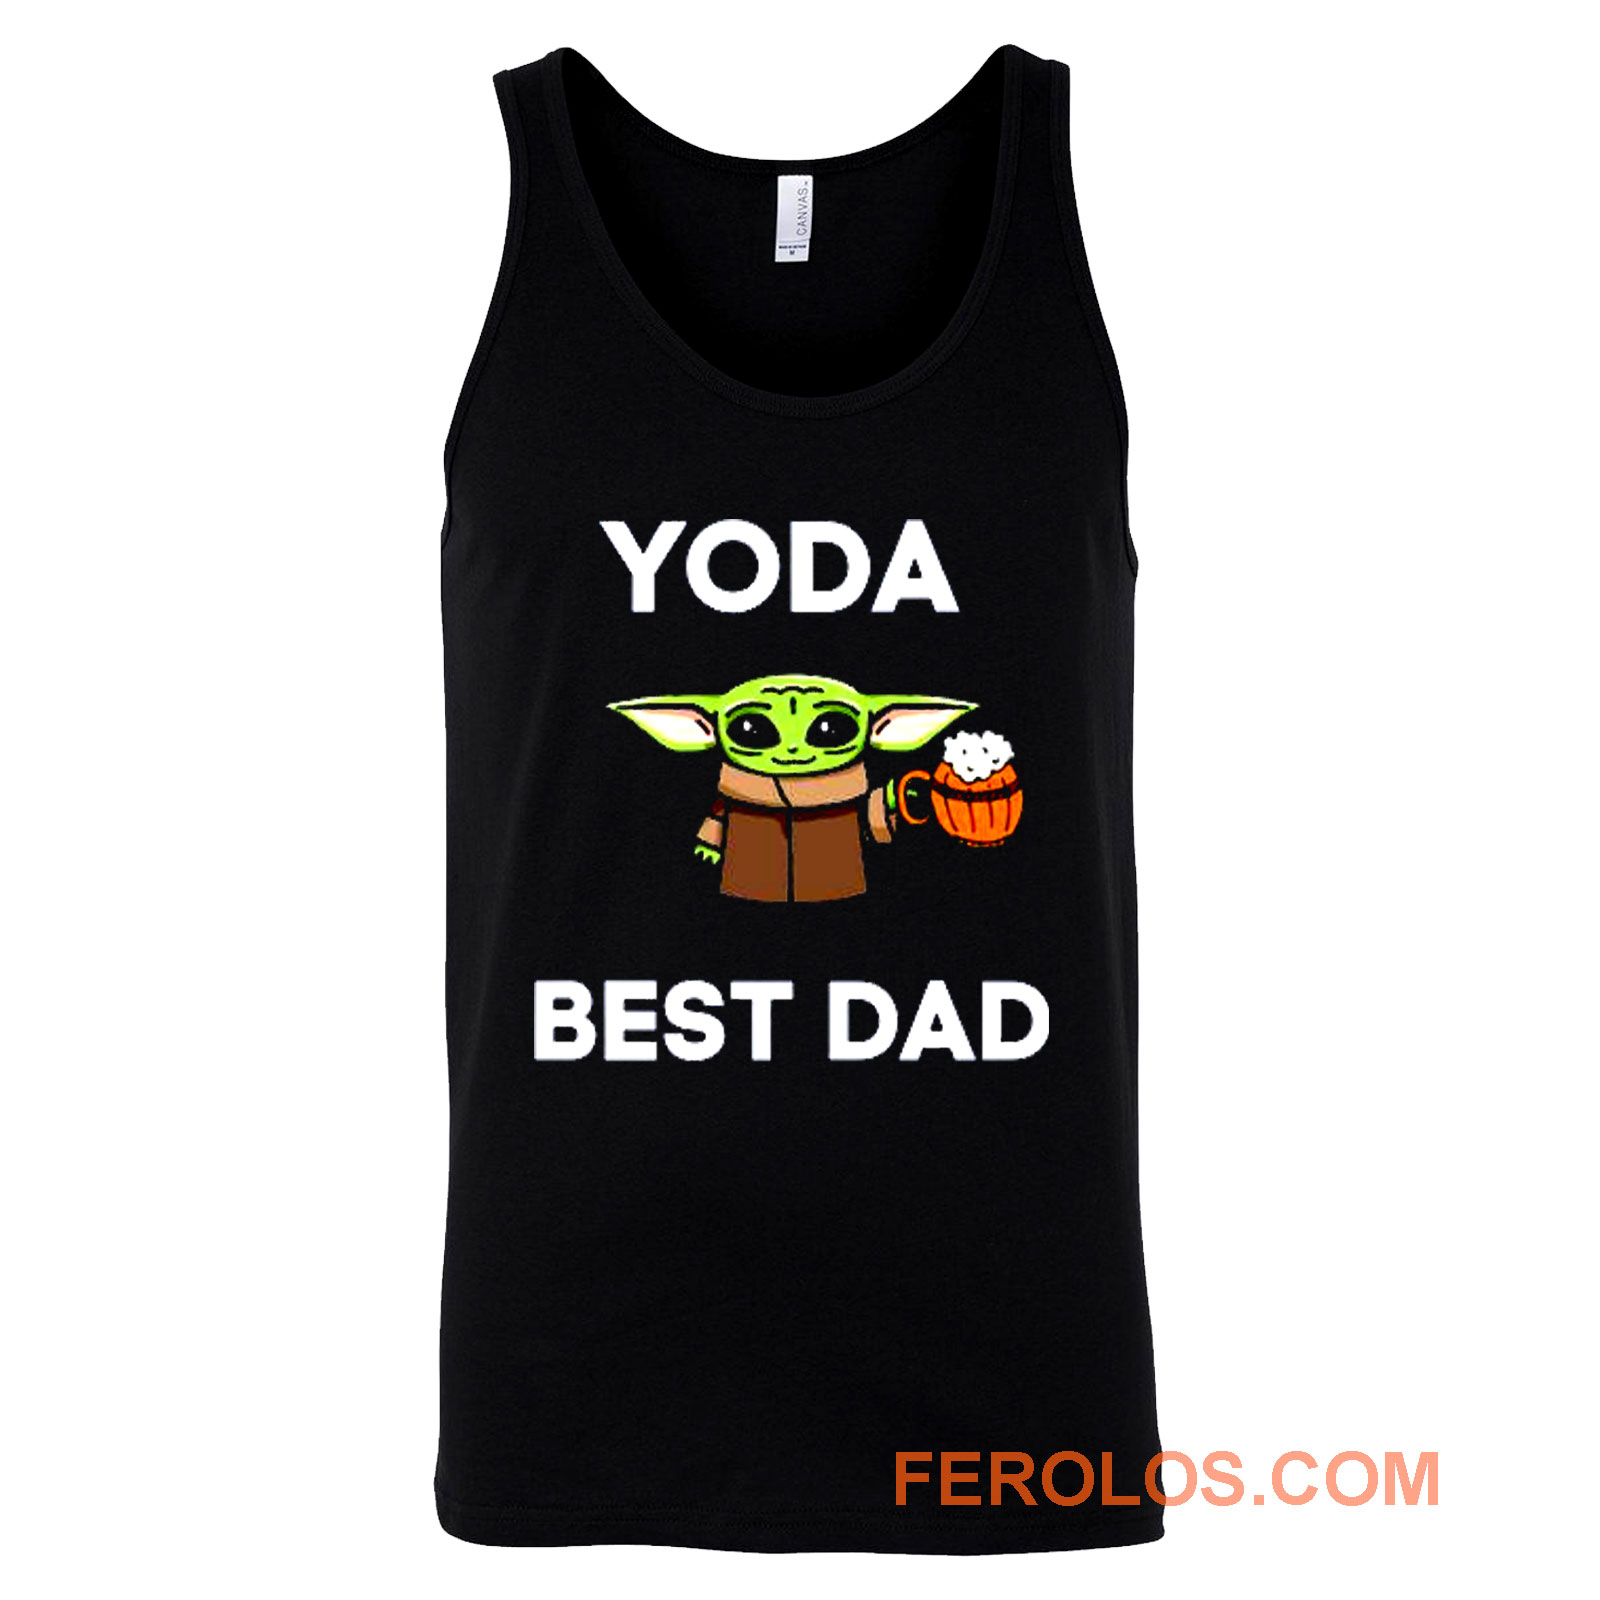 Yoda Best Dad Love You I Do Father Baby Yoda Funny Quotes Star Wars Tank  Top Men Women 